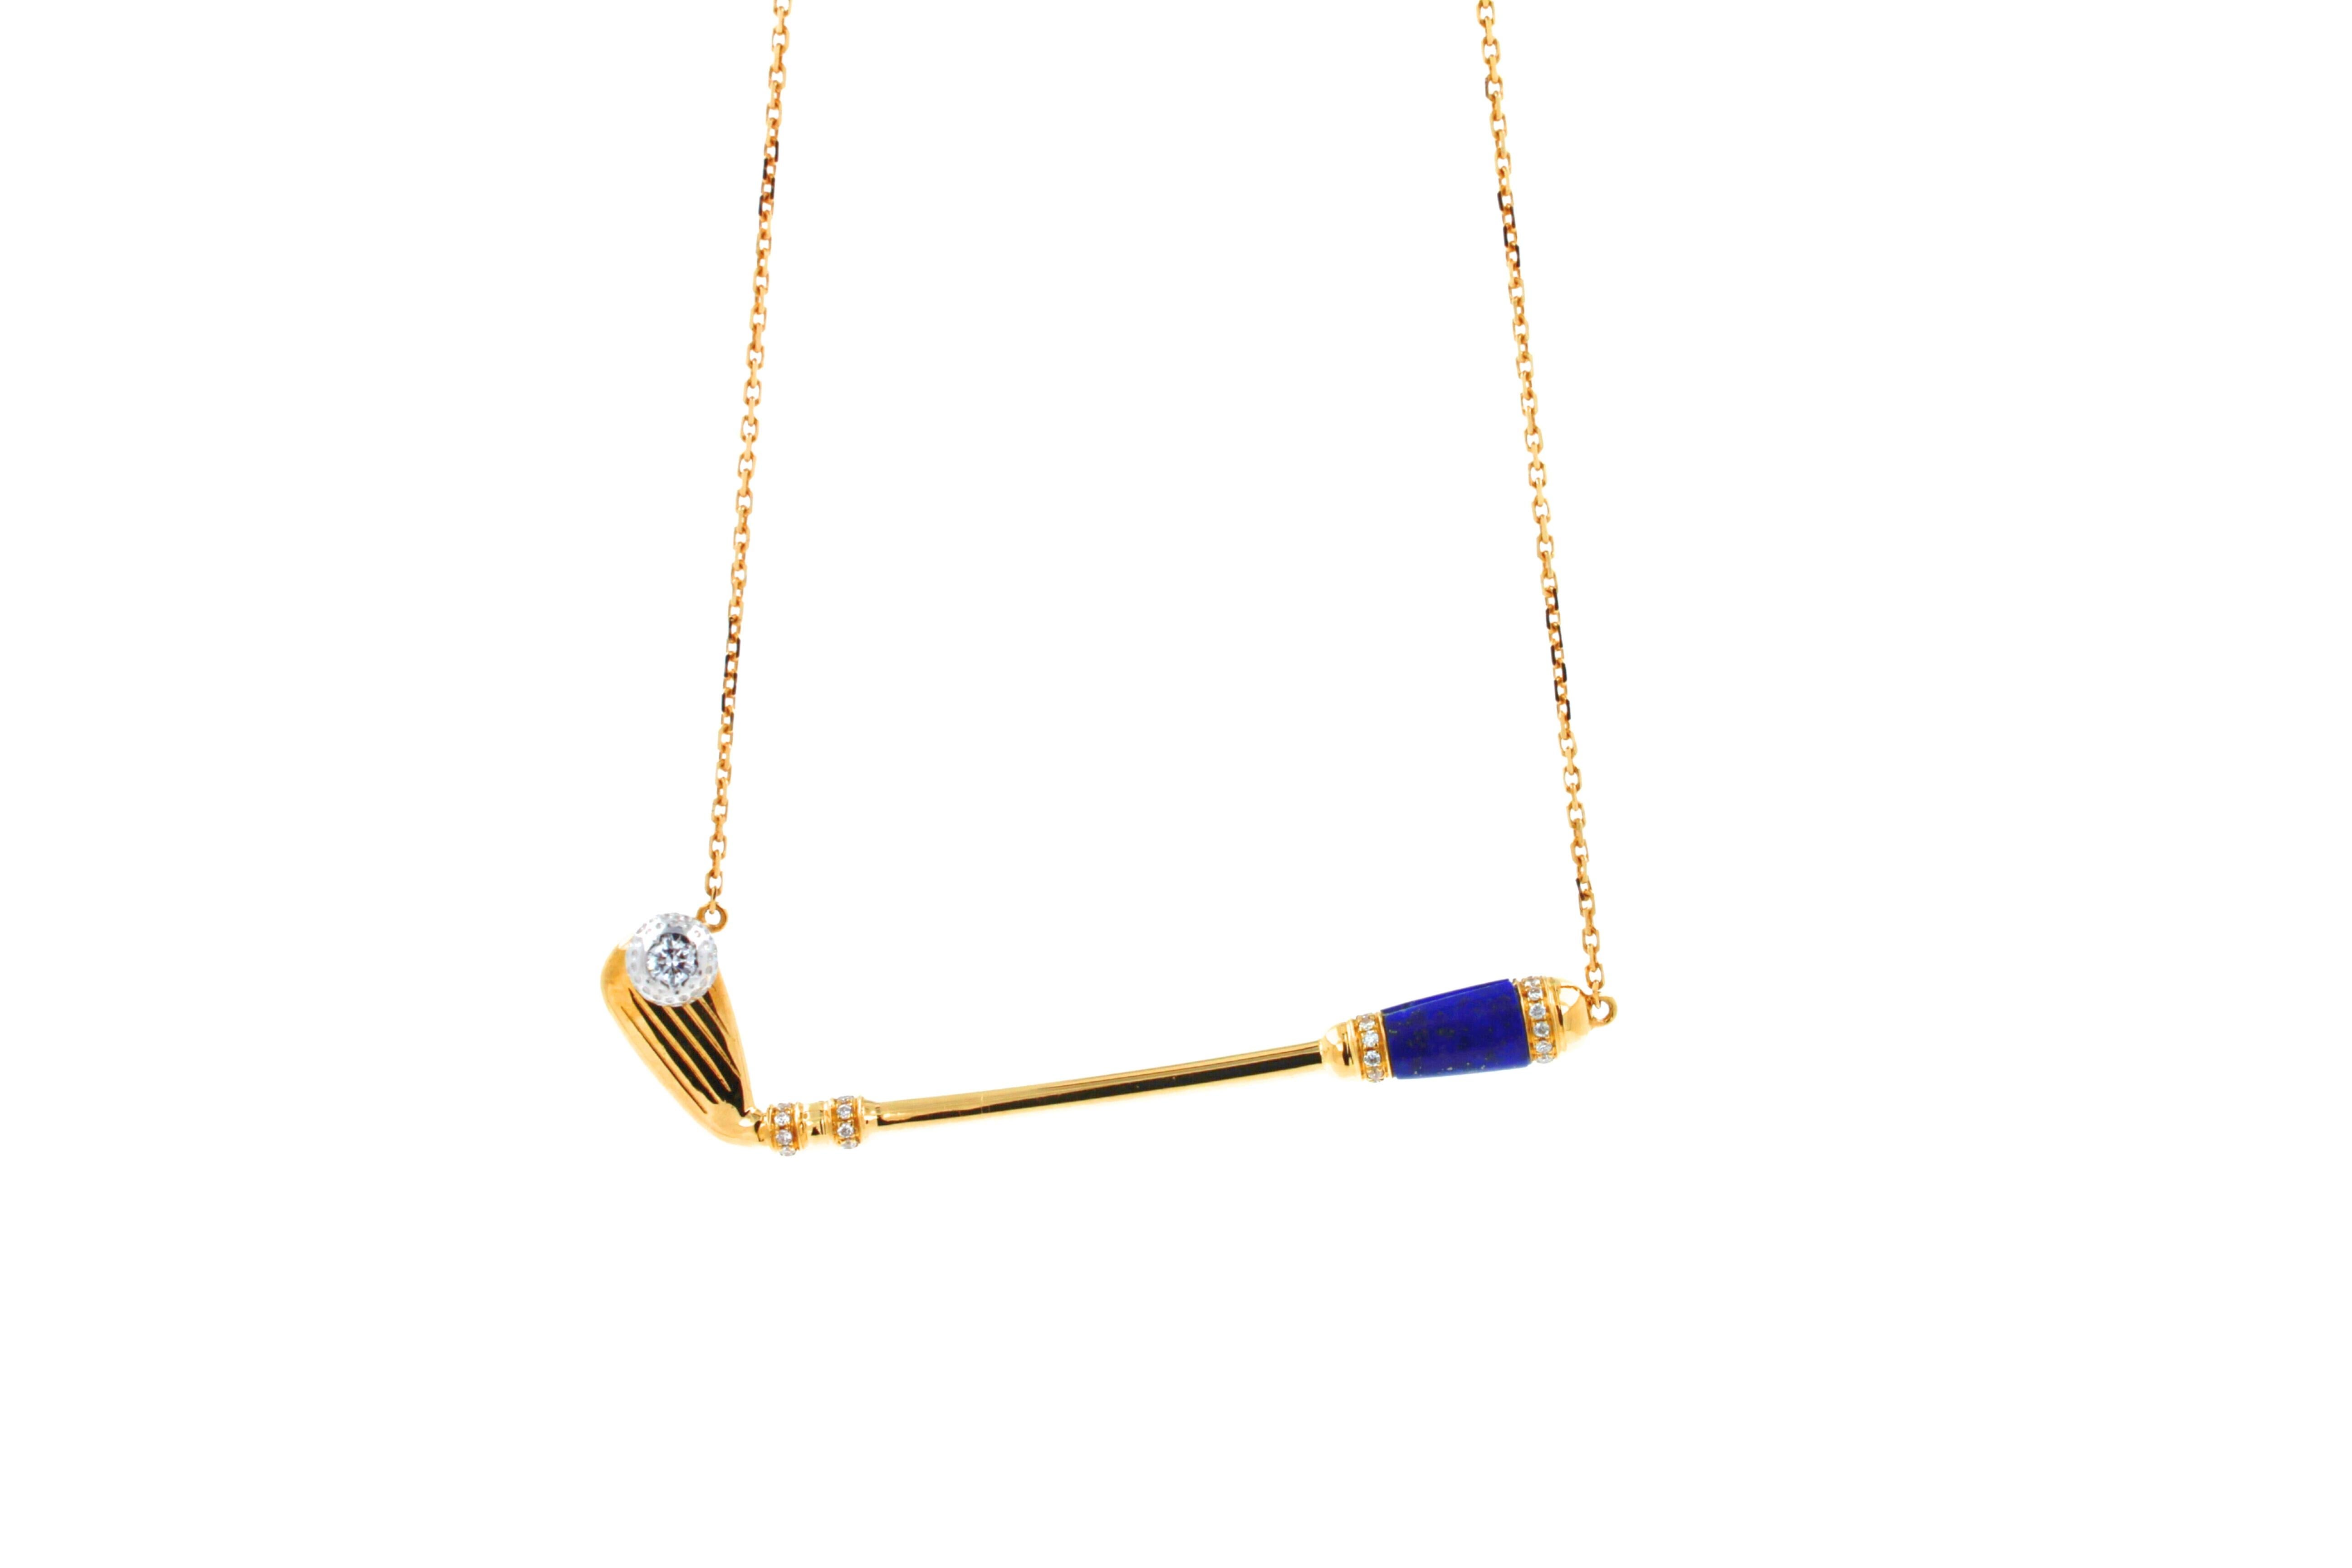 18K Yellow Gold
Blue Lapis Lazuli Gemstone Handle
White Diamond Golf Ball Gemstone
0.25 cts Diamonds
16-18 inches Diamond-Cut Link Cable chain length
In-Stock
This is part of Galt & Bro. Jewelry's exclusive, custom made-to-order Golf Club Birdies